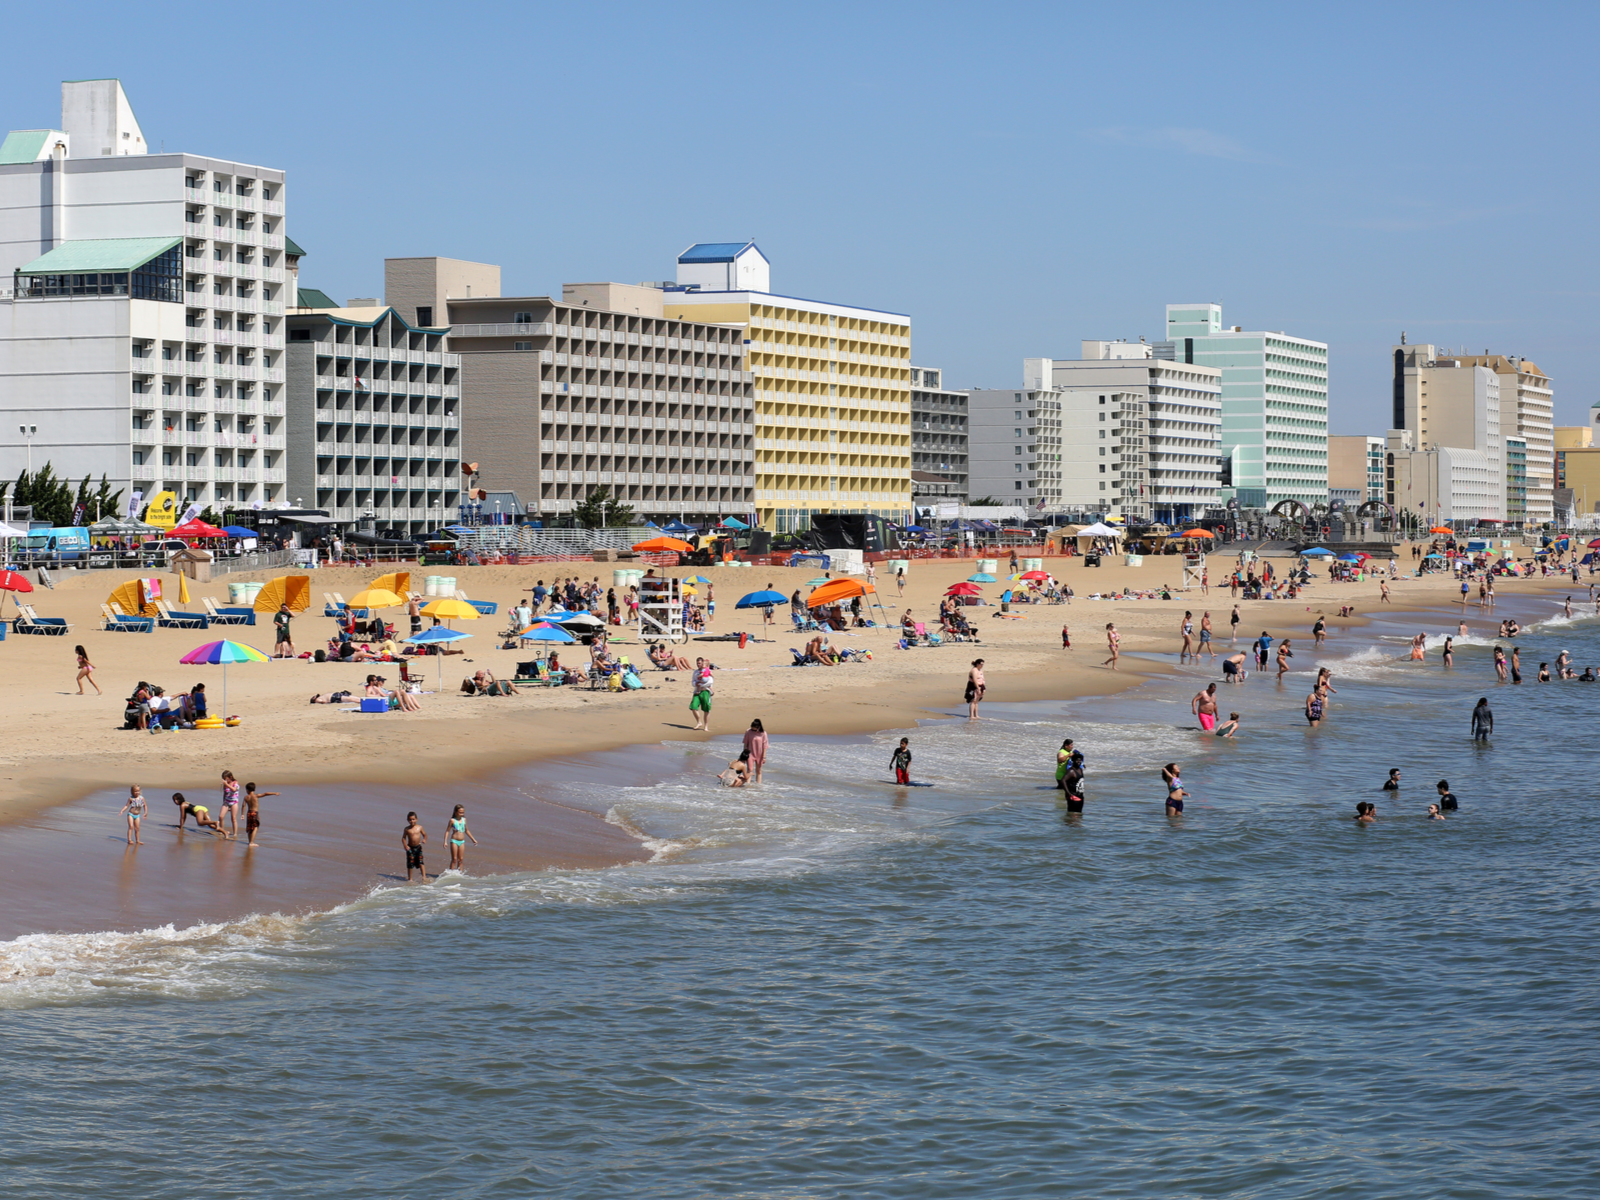 Adults and young ones enjoying a summer day at the Virginia Beach in Virginia, named as one of the best beaches on the East Coast, with resorts and hotels in background